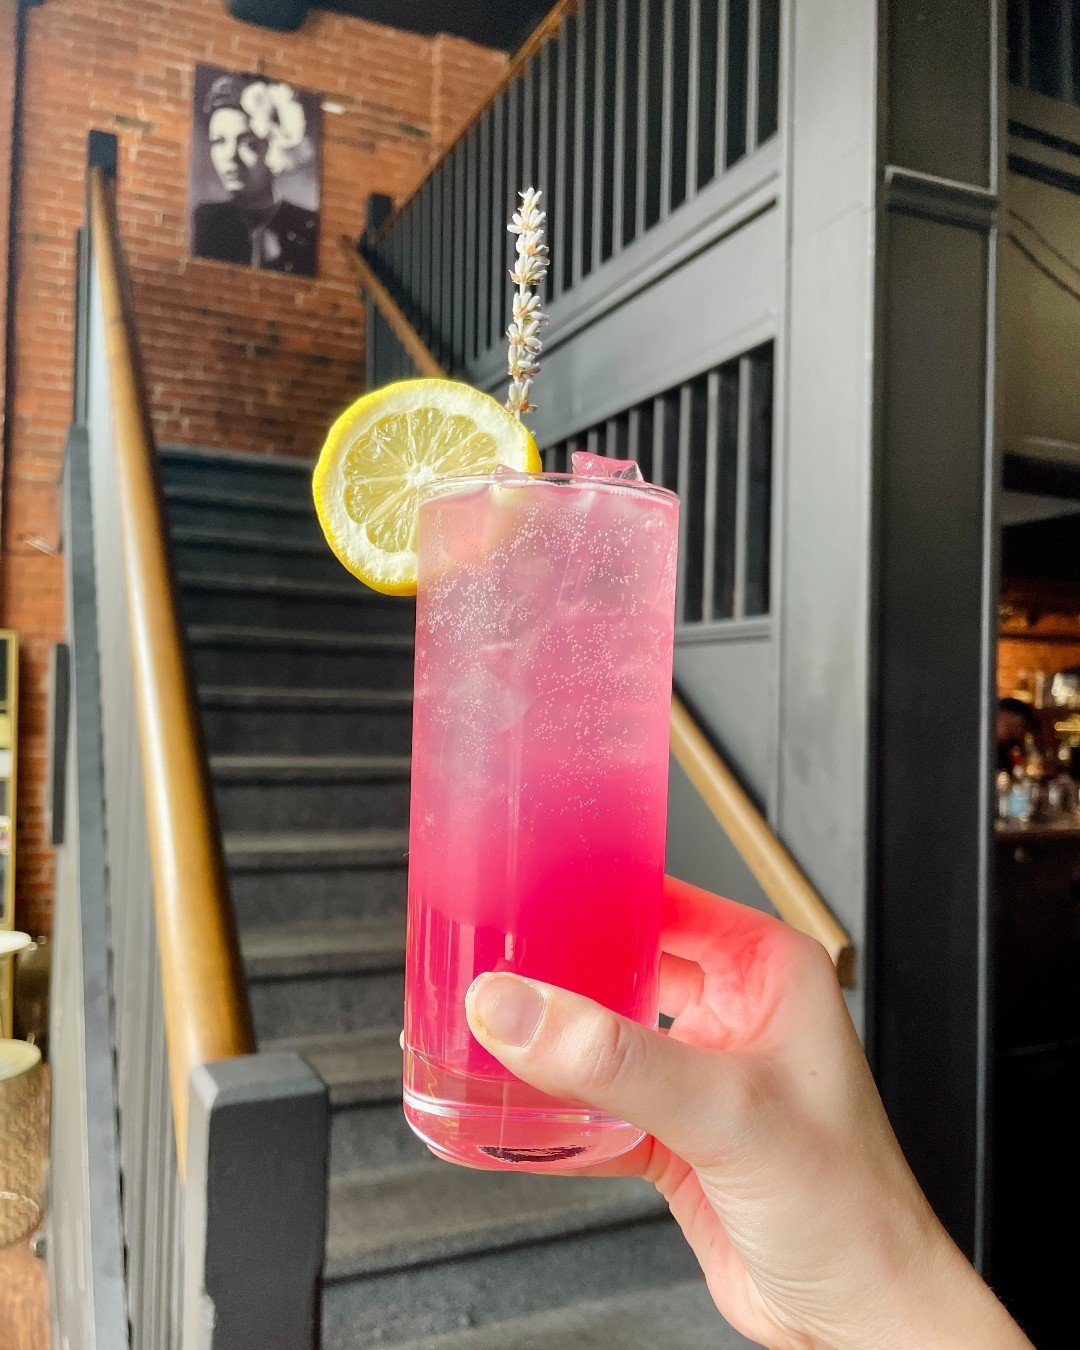 Made with Casamigos tequila, house made blueberry lavender syrup, lemon juice and topped with soda water, our &quot;Feelin' Good&quot; is one of our most popular cocktails on our menu. 🍋 🫐

Try one today at brunch, we're open 10am-5pm! Reserve at t